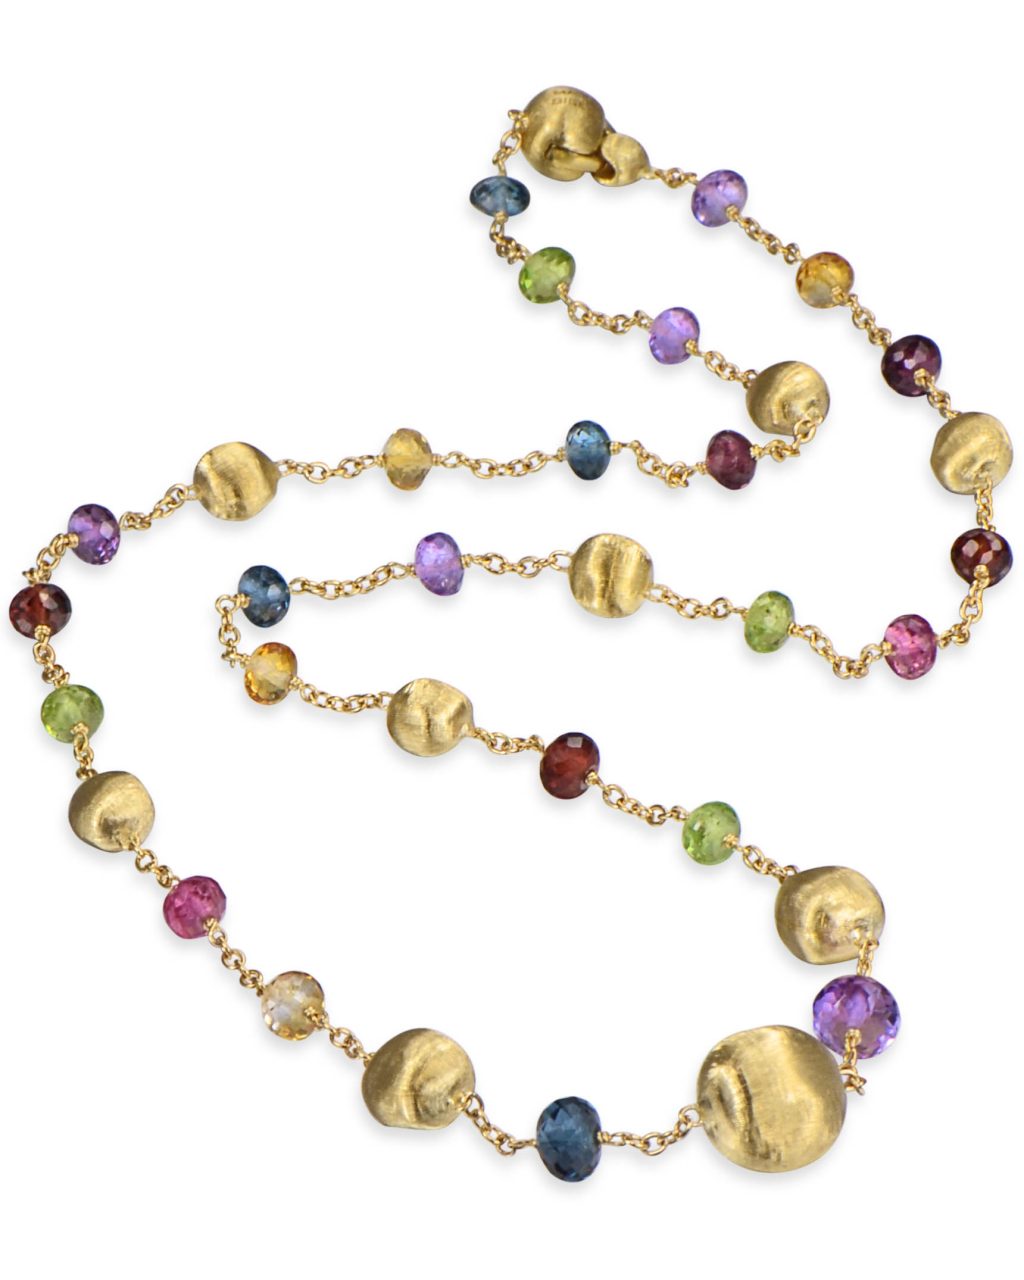 Mixed Stone Africa Bead Necklace by Marco Bicego - Turgeon Raine